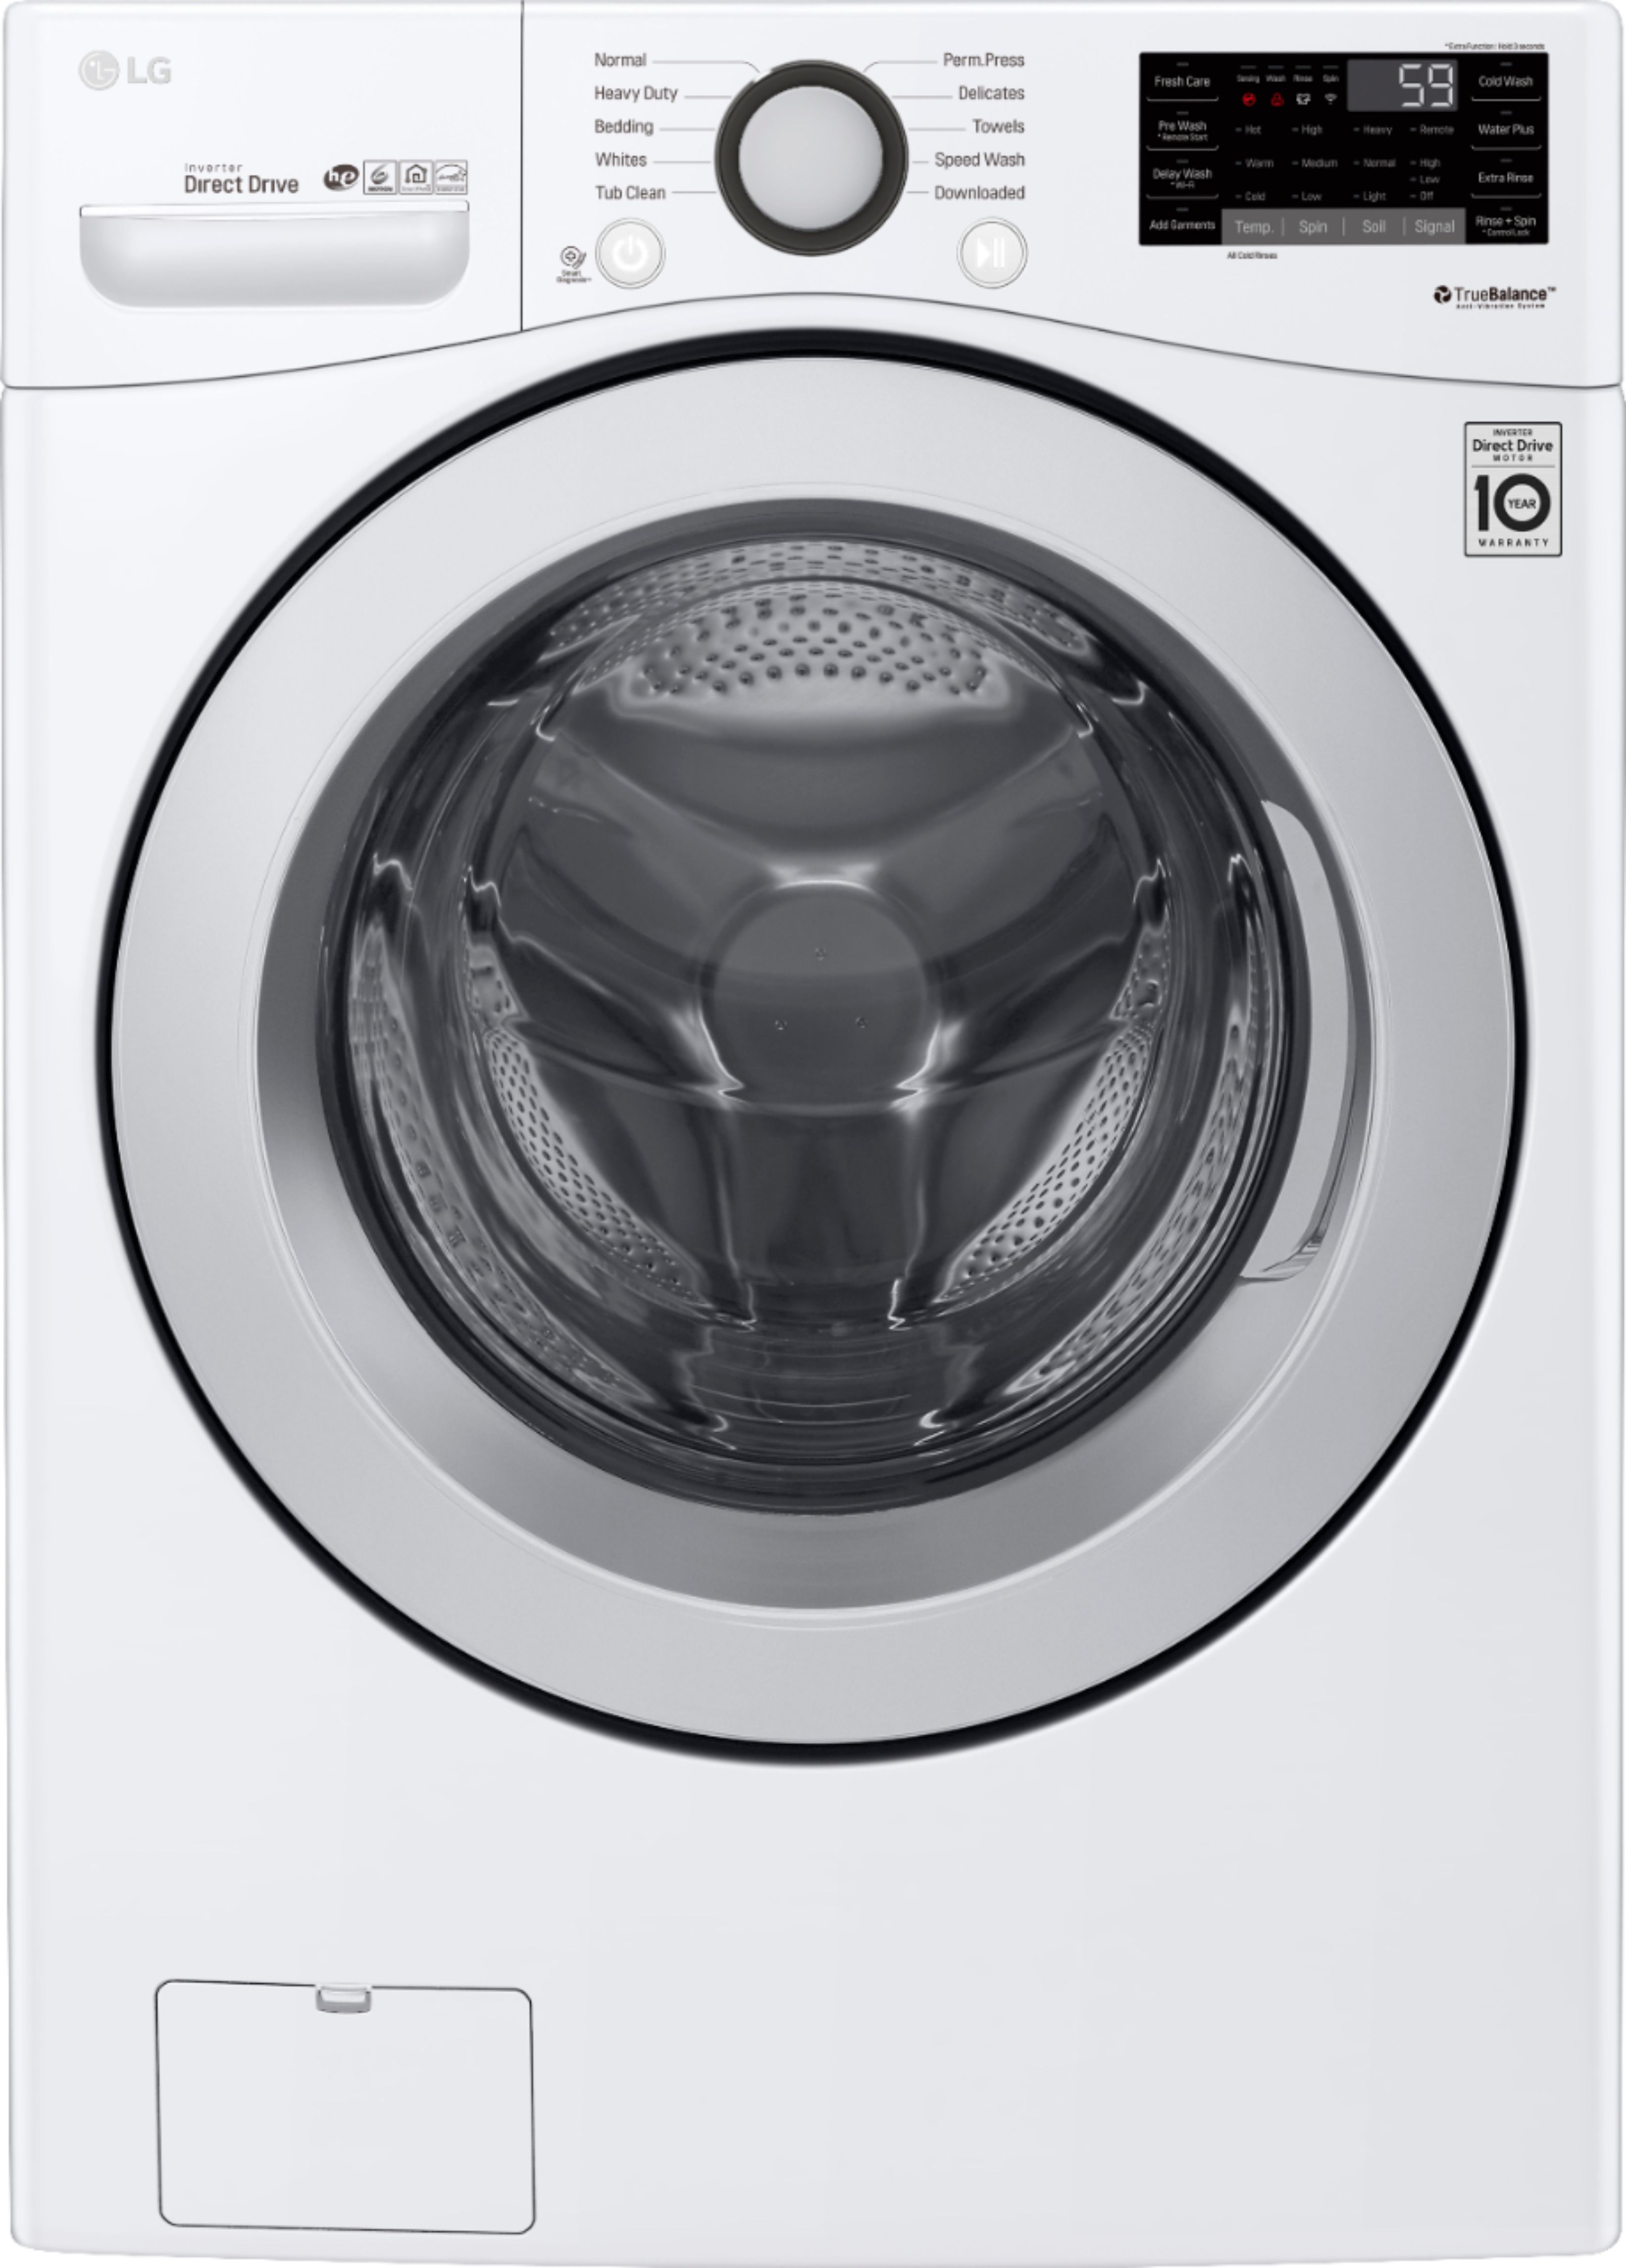 Customer Reviews Lg 4 5 Cu Ft 10 Cycle Front Loading Smart Wi Fi Washer With 6motion Technology White Wm3500cw Best Buy